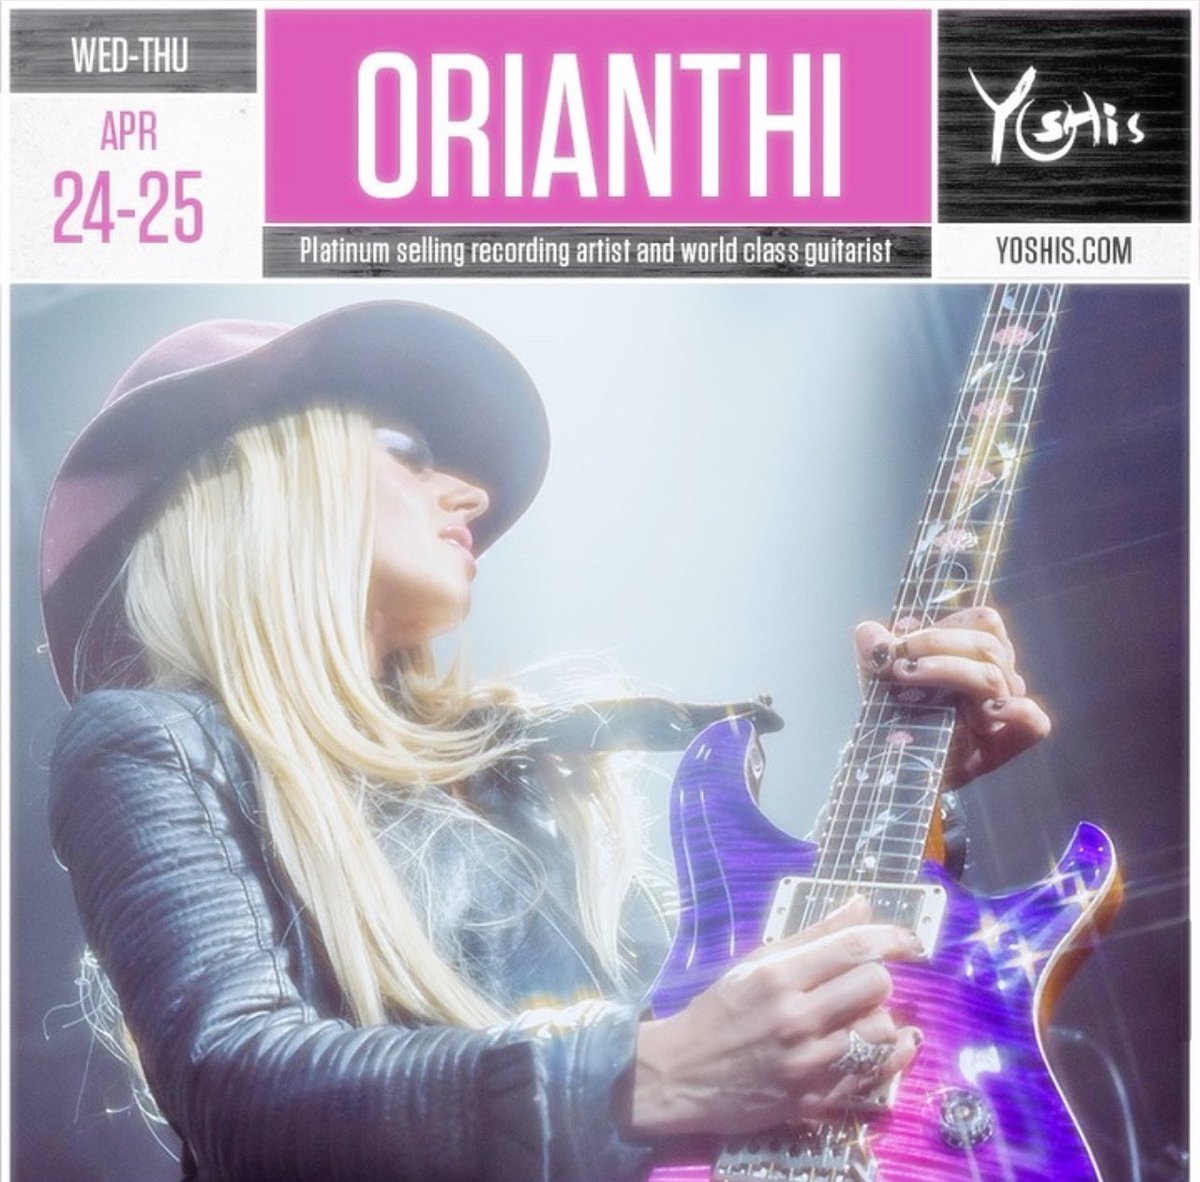 2 nights coming up in Oakland orianthi.me for tickets 🎟